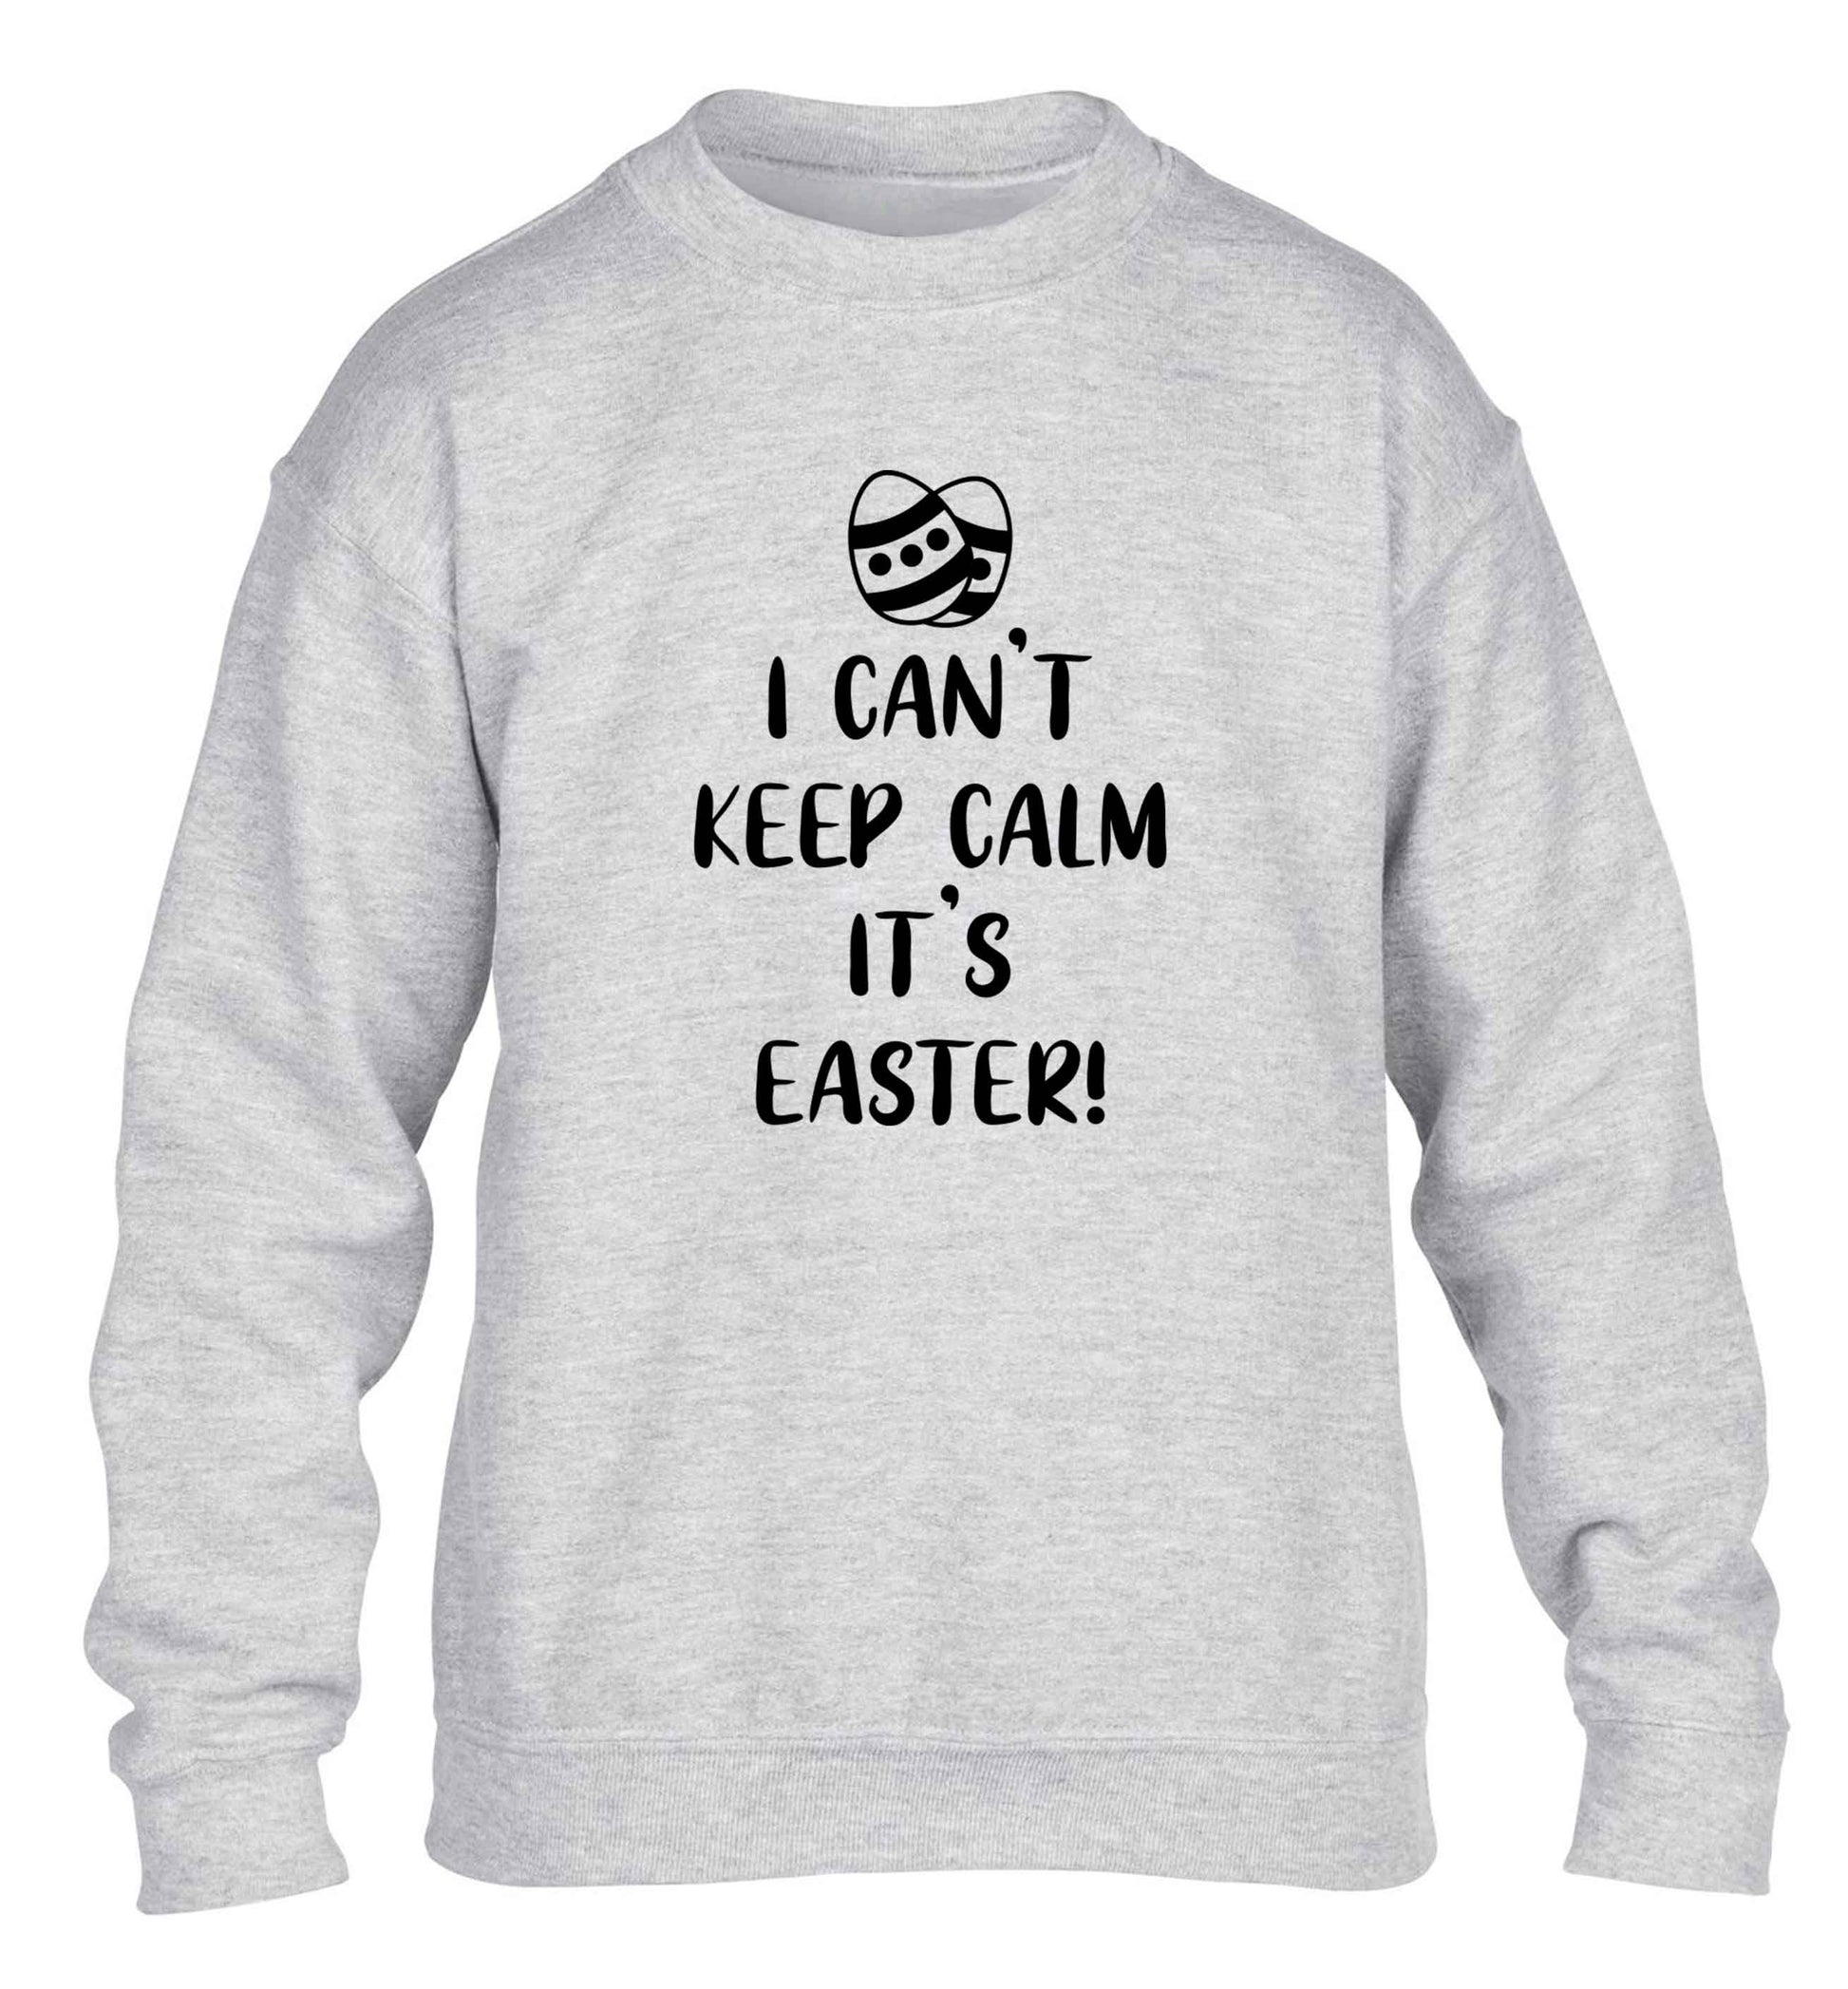 I can't keep calm it's Easter children's grey sweater 12-13 Years